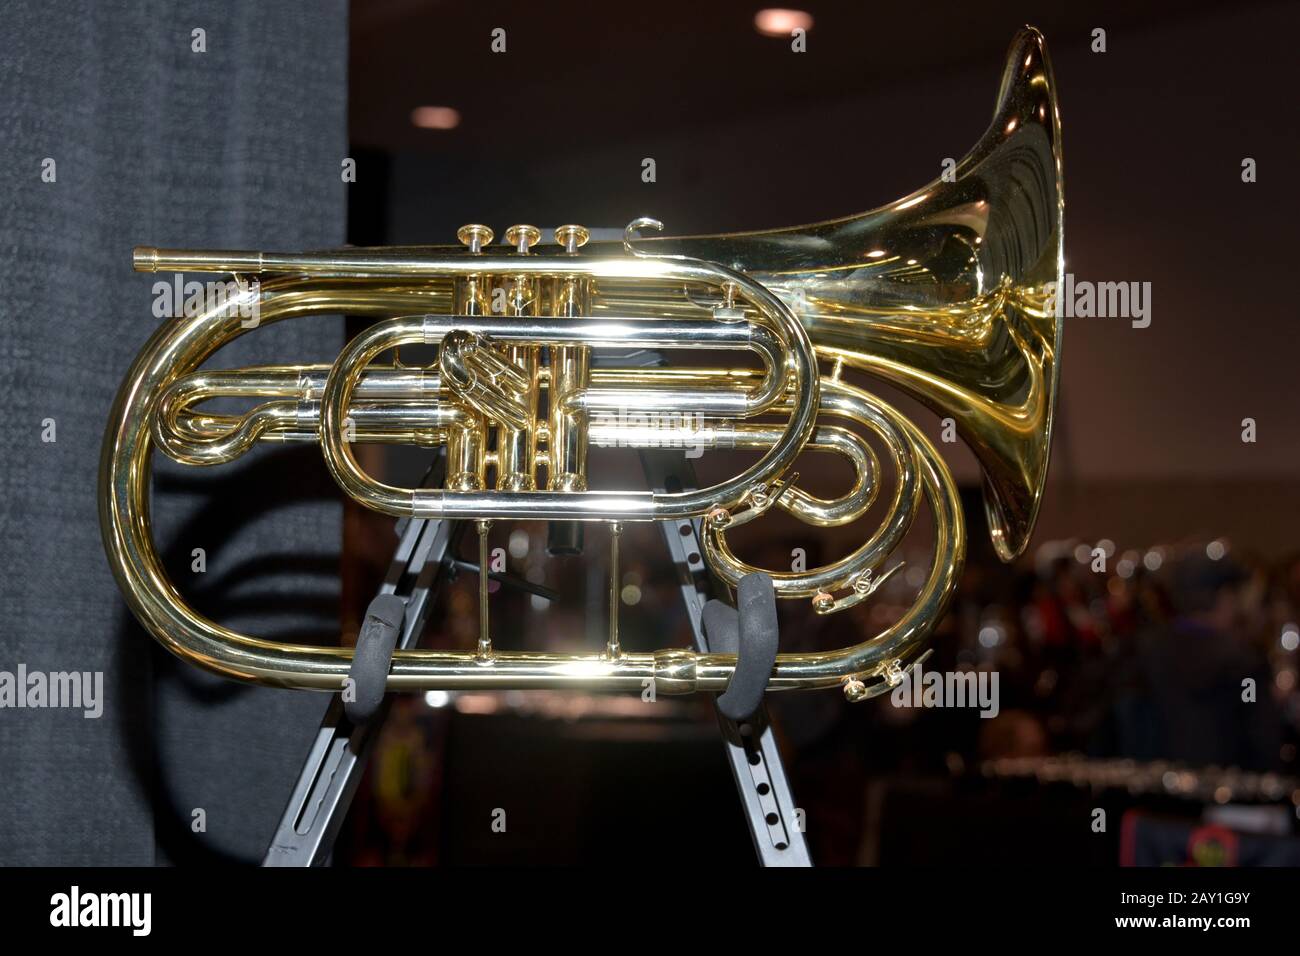 ANAHEIM, CA - JANUARY 17: Adams Marching Brass - Tuba at the "NAMM Show" on  January 17 in Anaheim California. (Photo by Glenn Francis /PacificProDig  Stock Photo - Alamy